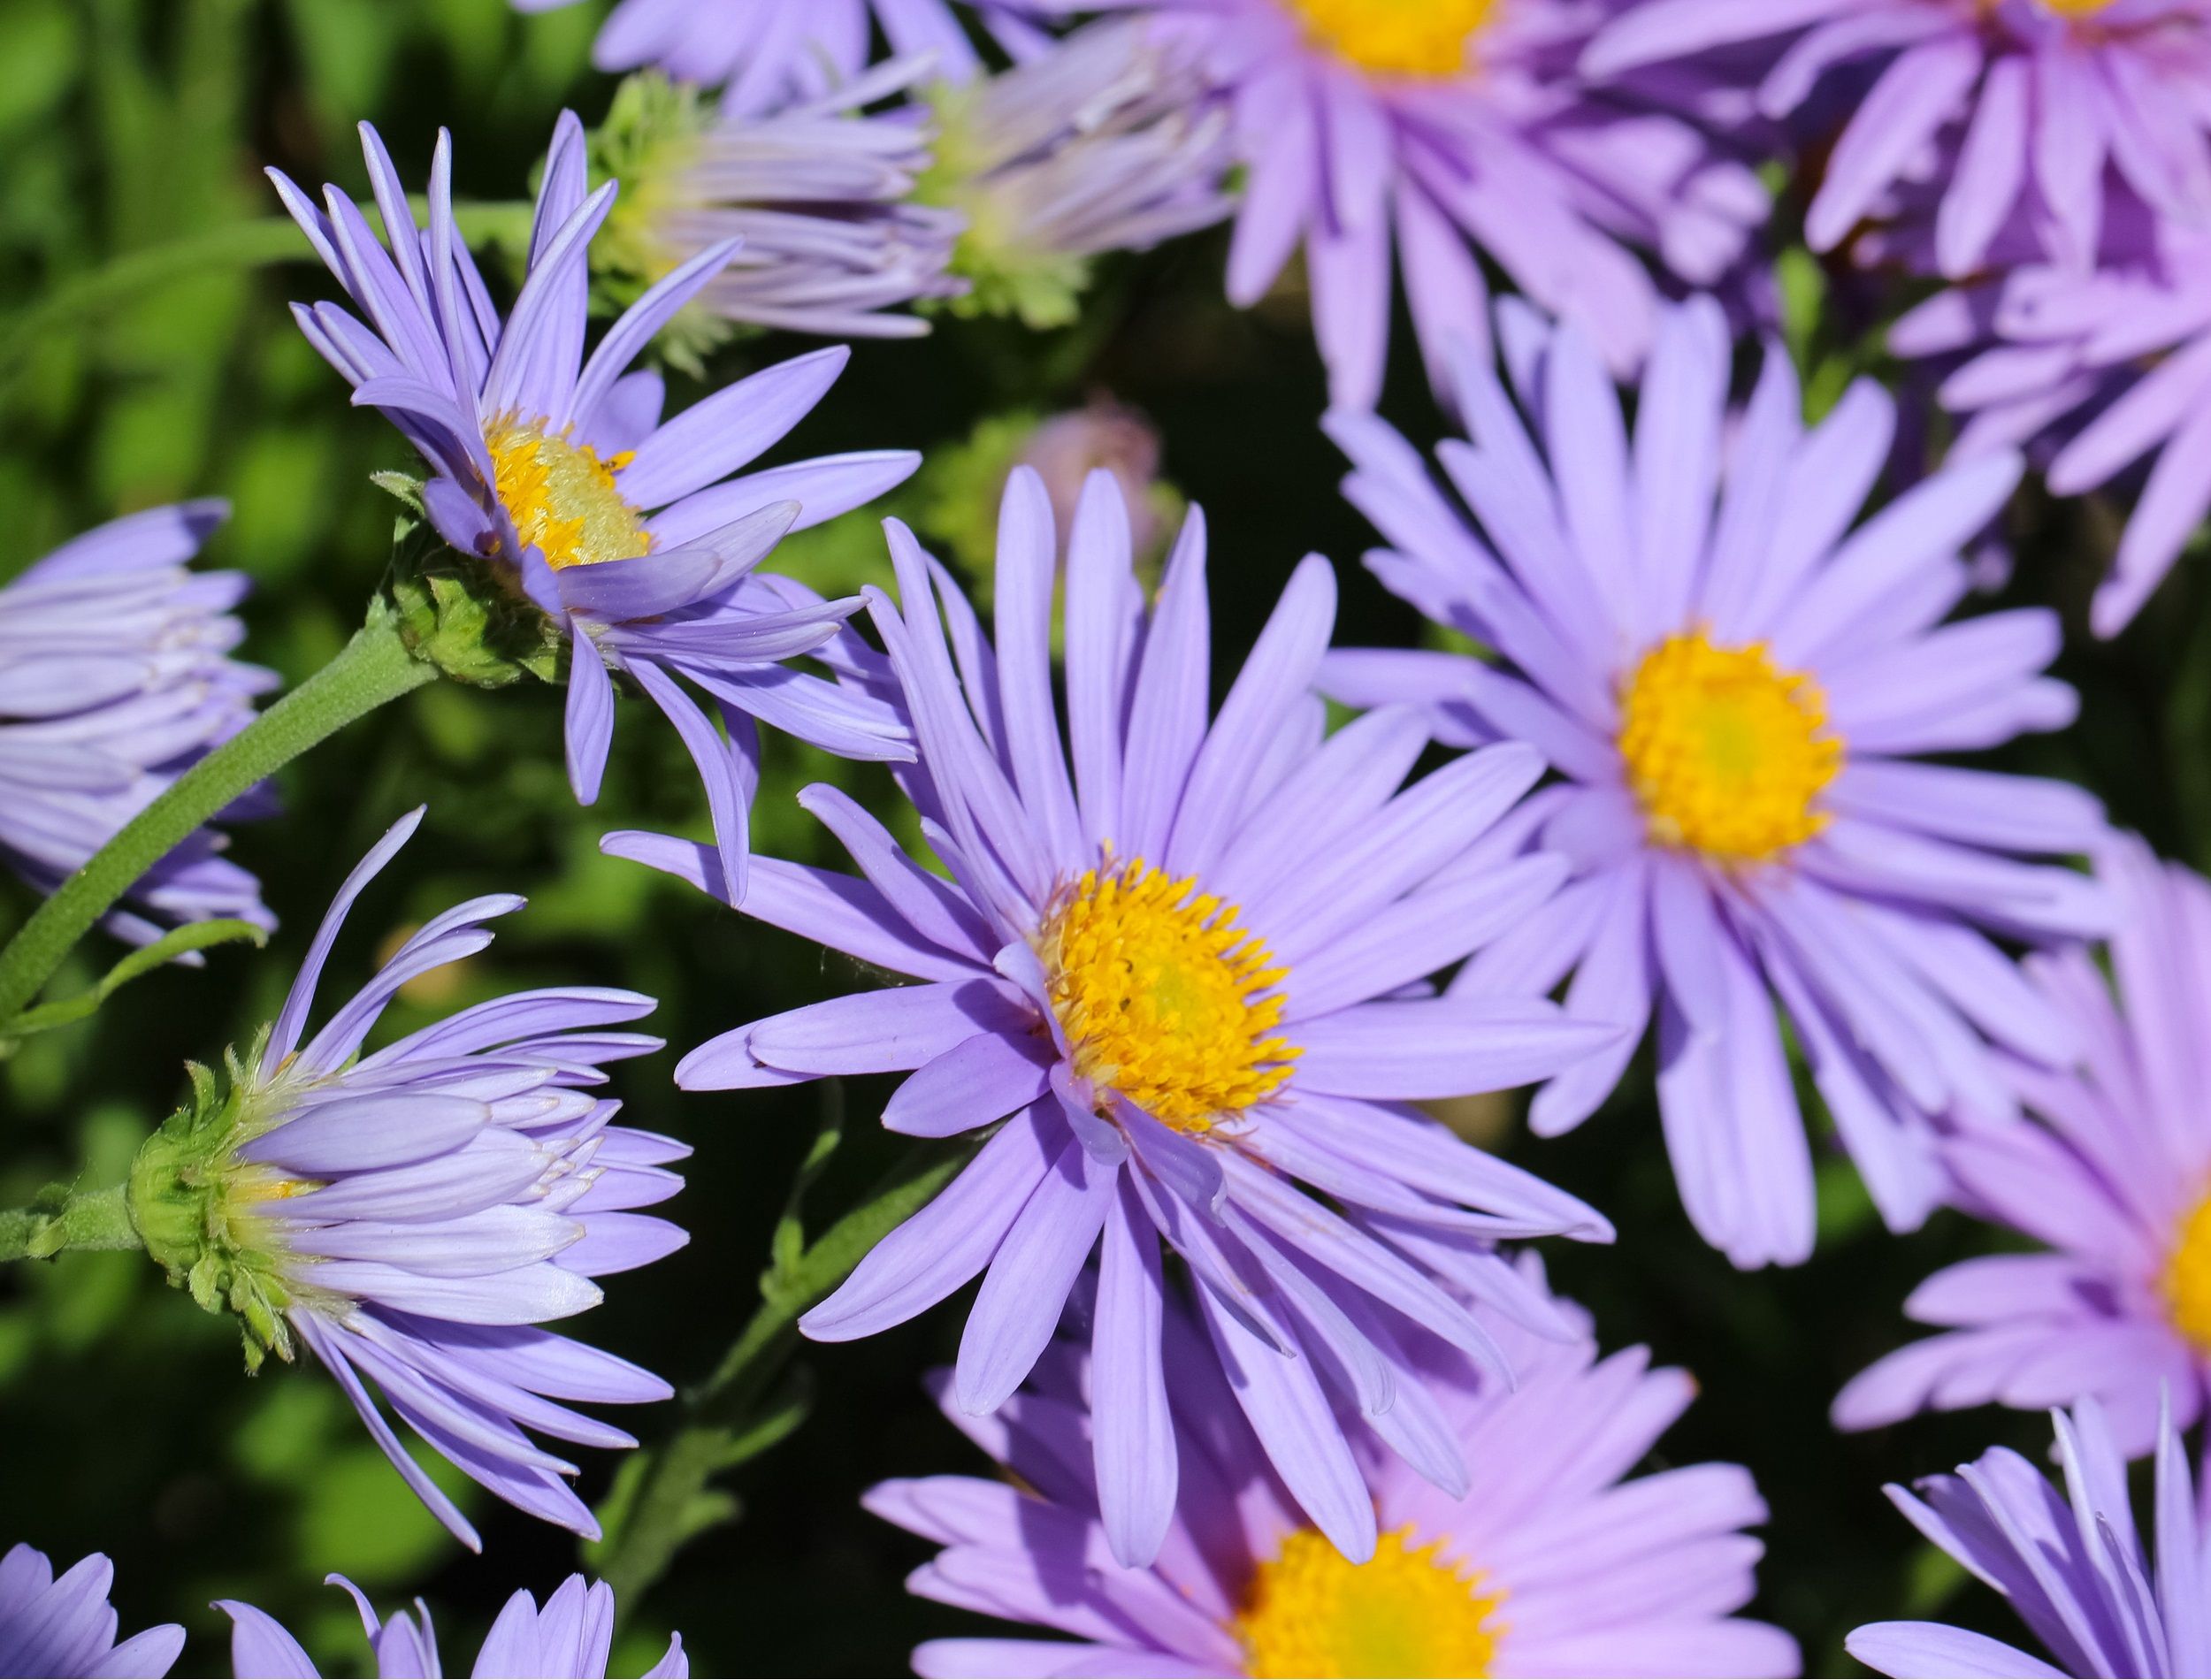 Close-up of alpine aster flowers in the garden (Lat. Aster alpinus), large format